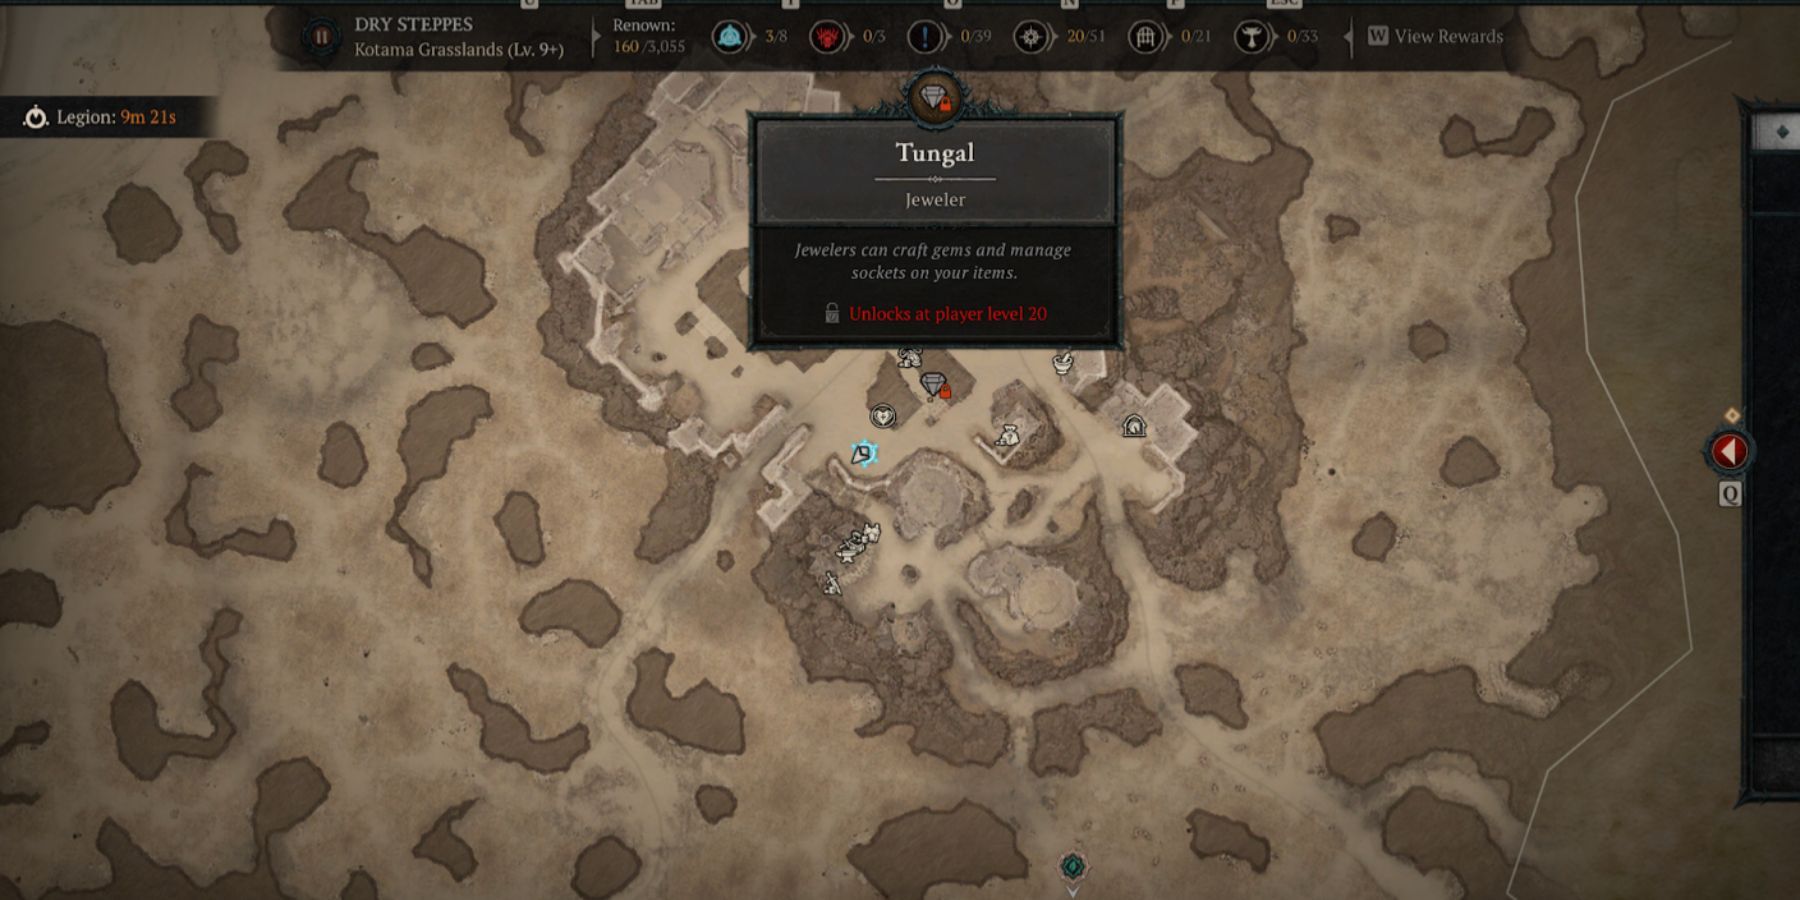 Tungal location on the map in Diablo 4